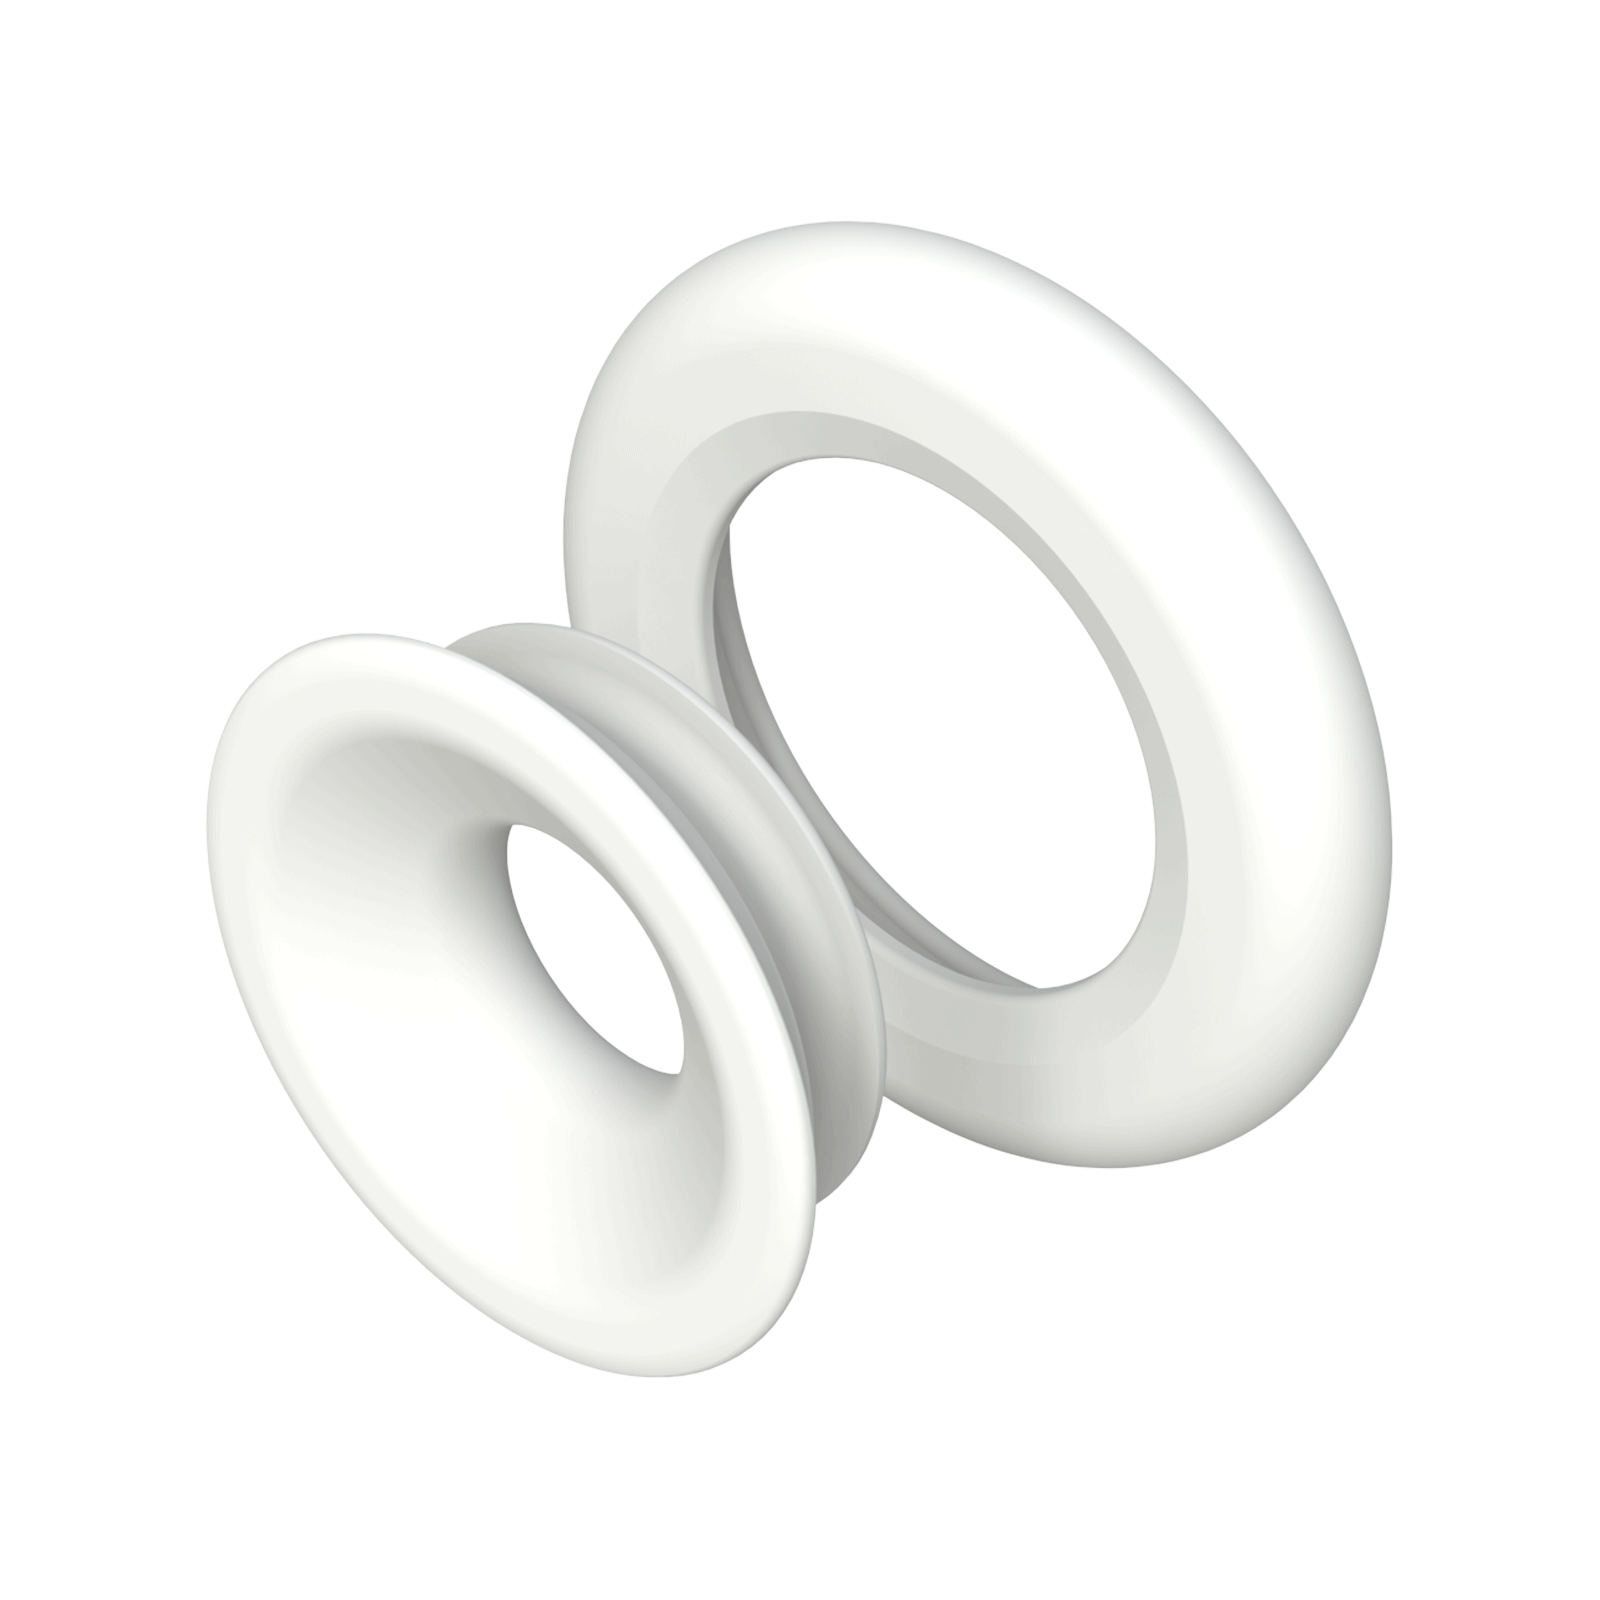 <b>ClickClix®</b> is a <b>patented system to join textiles</b>. Each <b>ClickClix®</b> set consists of two pieces, a male button and a female ring that acts as an anchor or fixation. It is available in <b>three models</b> that are distinguished by the depth of the pieces, so each model is suitable for fabrics of different thicknesses: <br/>
<br/>
* <b>ClickClix® S</b>: Model intended for the finest fabrics. Especially recommended in its application to join socks and prevent the pairs from being lost during the washing process. <br/>
* <b>ClickClix® M</b>: Ideal for medium thickness fabrics. A common use is in the duvet cover. Other applications are to identify garments with buttons of different colors or to close the pillowcases. <br/>
* <b>ClickClix® L</b>: Created to fix and join duvets, it is also suitable for clipping towels, rags and other thicker fabrics. <br/>
These buttons can be installed using the <b>ClickClix® tool</b>, a clamp specifically designed to perform this task quickly and efficiently. <br/>
<br/>
All models have an equivalent diameter, so they are <b>compatible</b> with each other and multiply the possible applications. Another peculiarity of the ClickClix® button system is the possibility of joining them sequentially and infinitely, as shown in the video. They can also be used in combination with the <b><a href='https://www.isc-sl.com/clickclixr-adhesive/iscy/' target='_parent'> ClickClix® ISCY Adhesive </a></b> to applications such as hanging towels and rags or attaching the shower curtain to the wall. <br/>
<br/>
<b>ClickClix</b>® (model S) has had a crucial importance  for our SockFix® product  to be considered as a <b><i>winner</b></i> in the <a href=https://ifworlddesignguide.com/search?q=sockfix&search=sockfix#/page/entry/307620-sockfixschool-the-pair-of-sox-that-never-get-lost' target='_blank'> <b>iF Design Awards</a></b> and as a <b>finalist</b> of the awards <a href=https://www.fad.cat/adi-fad/es/news/5245/projectes-seleccionats-dels-premis-adi' target='_blank'> <b>Delta ADI-FAD</a></b> by <b><i>reinventing the sock</b></i> and solving the problem of lost pairs.
<br/><br/>
For more information, you can consult <b><a href='https://www.click-clix.com/'  target='_blank'>our web ClickClix® </a></b> or contact our commercial department.
<br/>